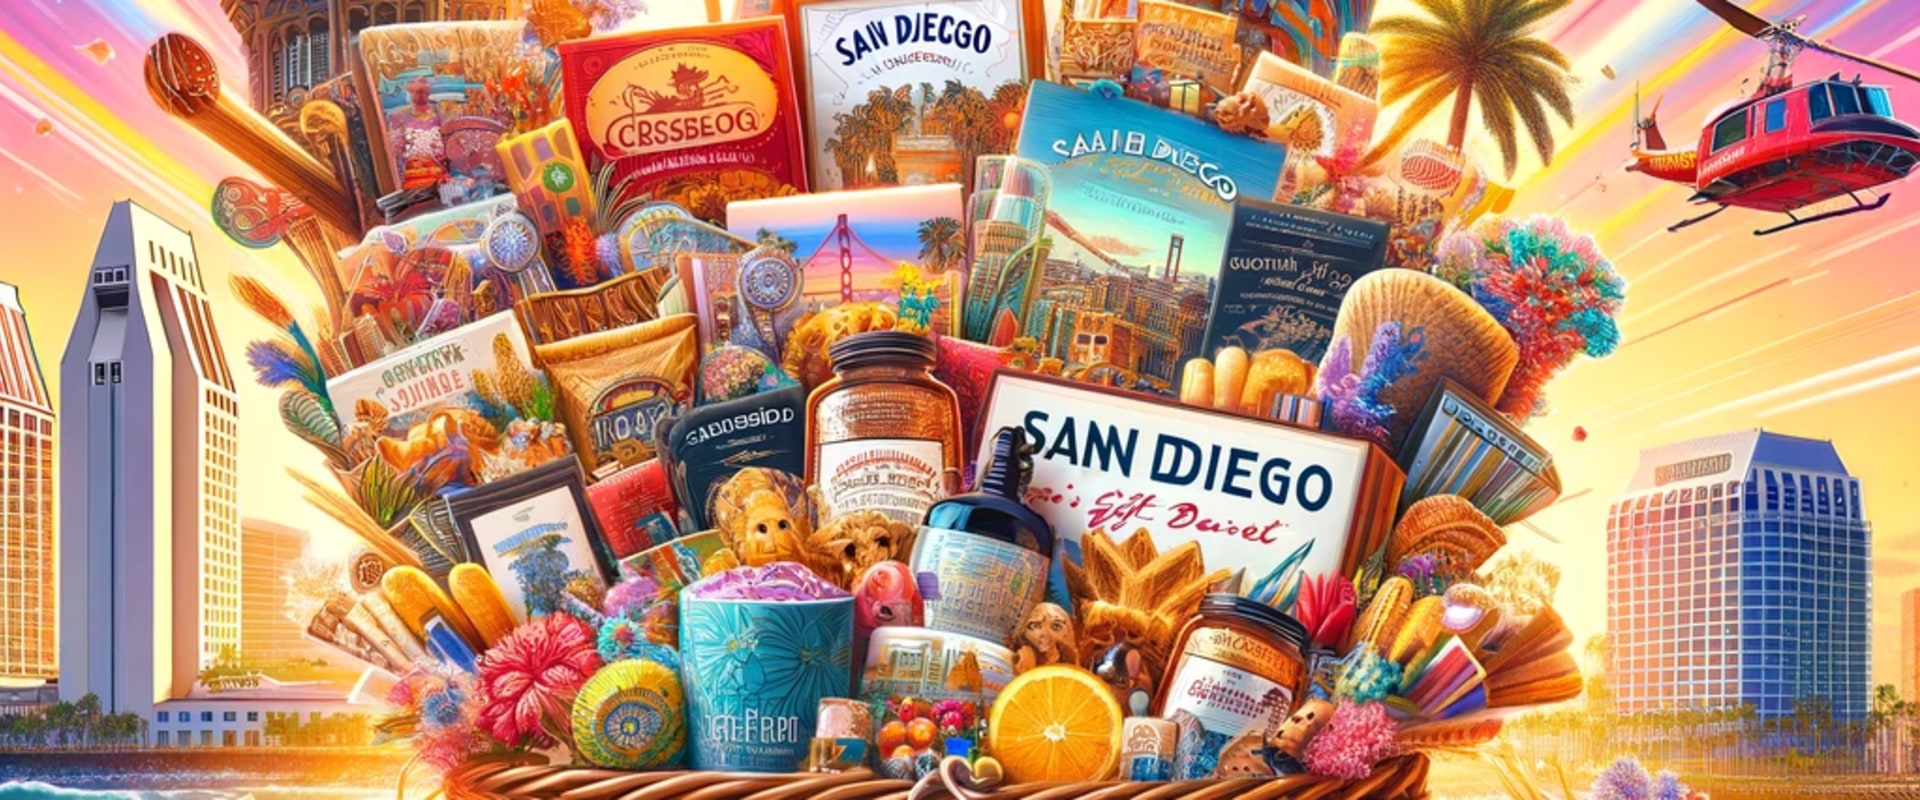 Exploring the Buzz: San Diego's Own Gift Basket Trend